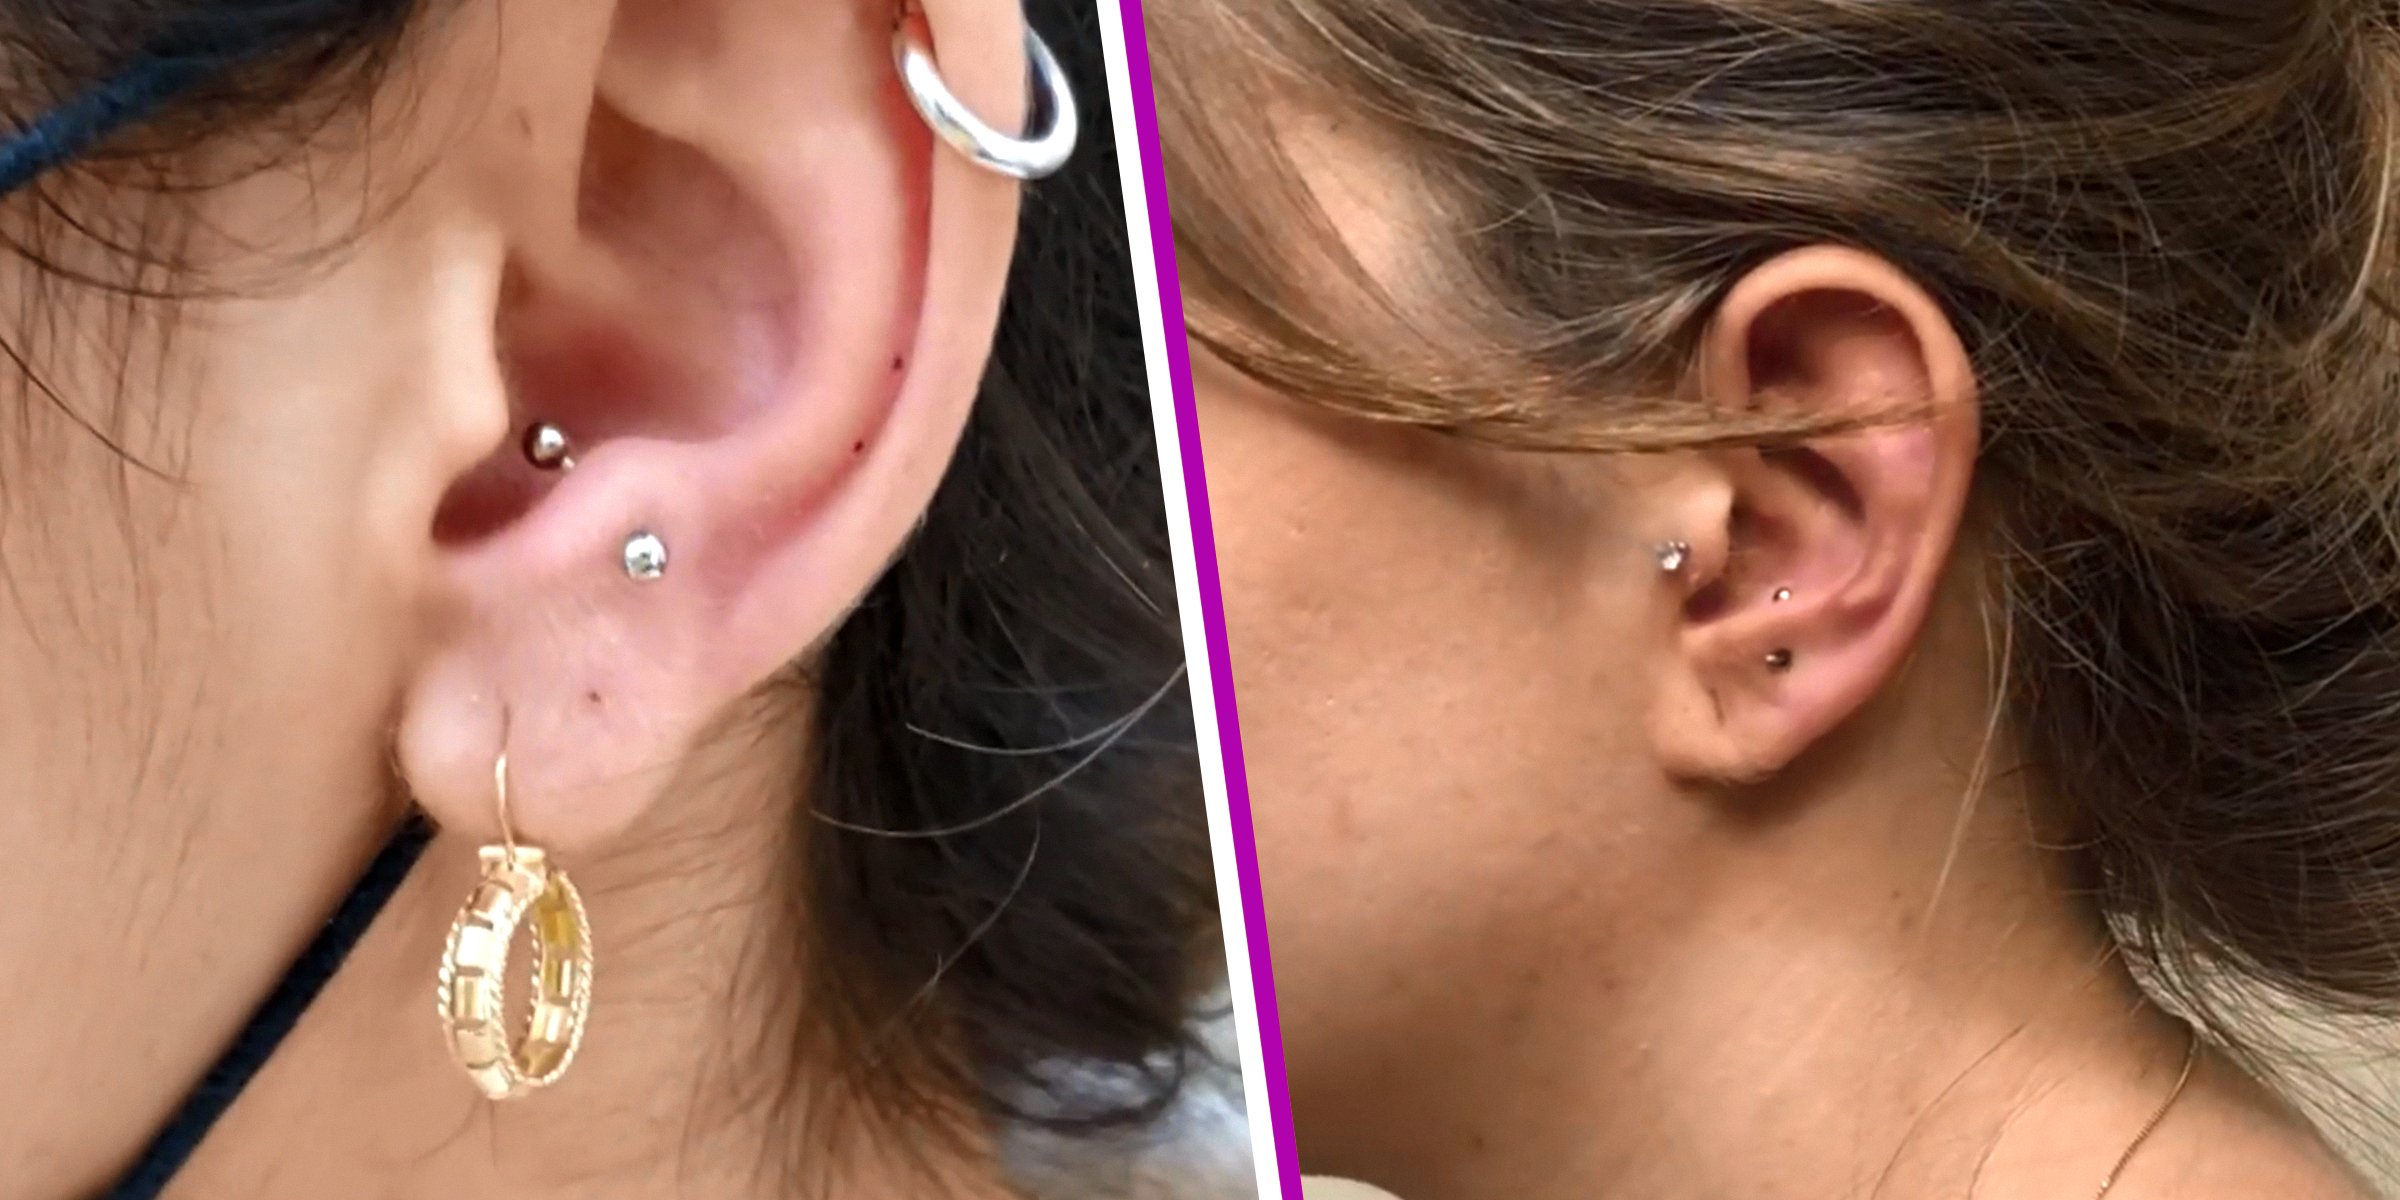 A Close-up Photo of a Woman with an Anti-tragus Piercing | Source: YouTube/Nick Piercing